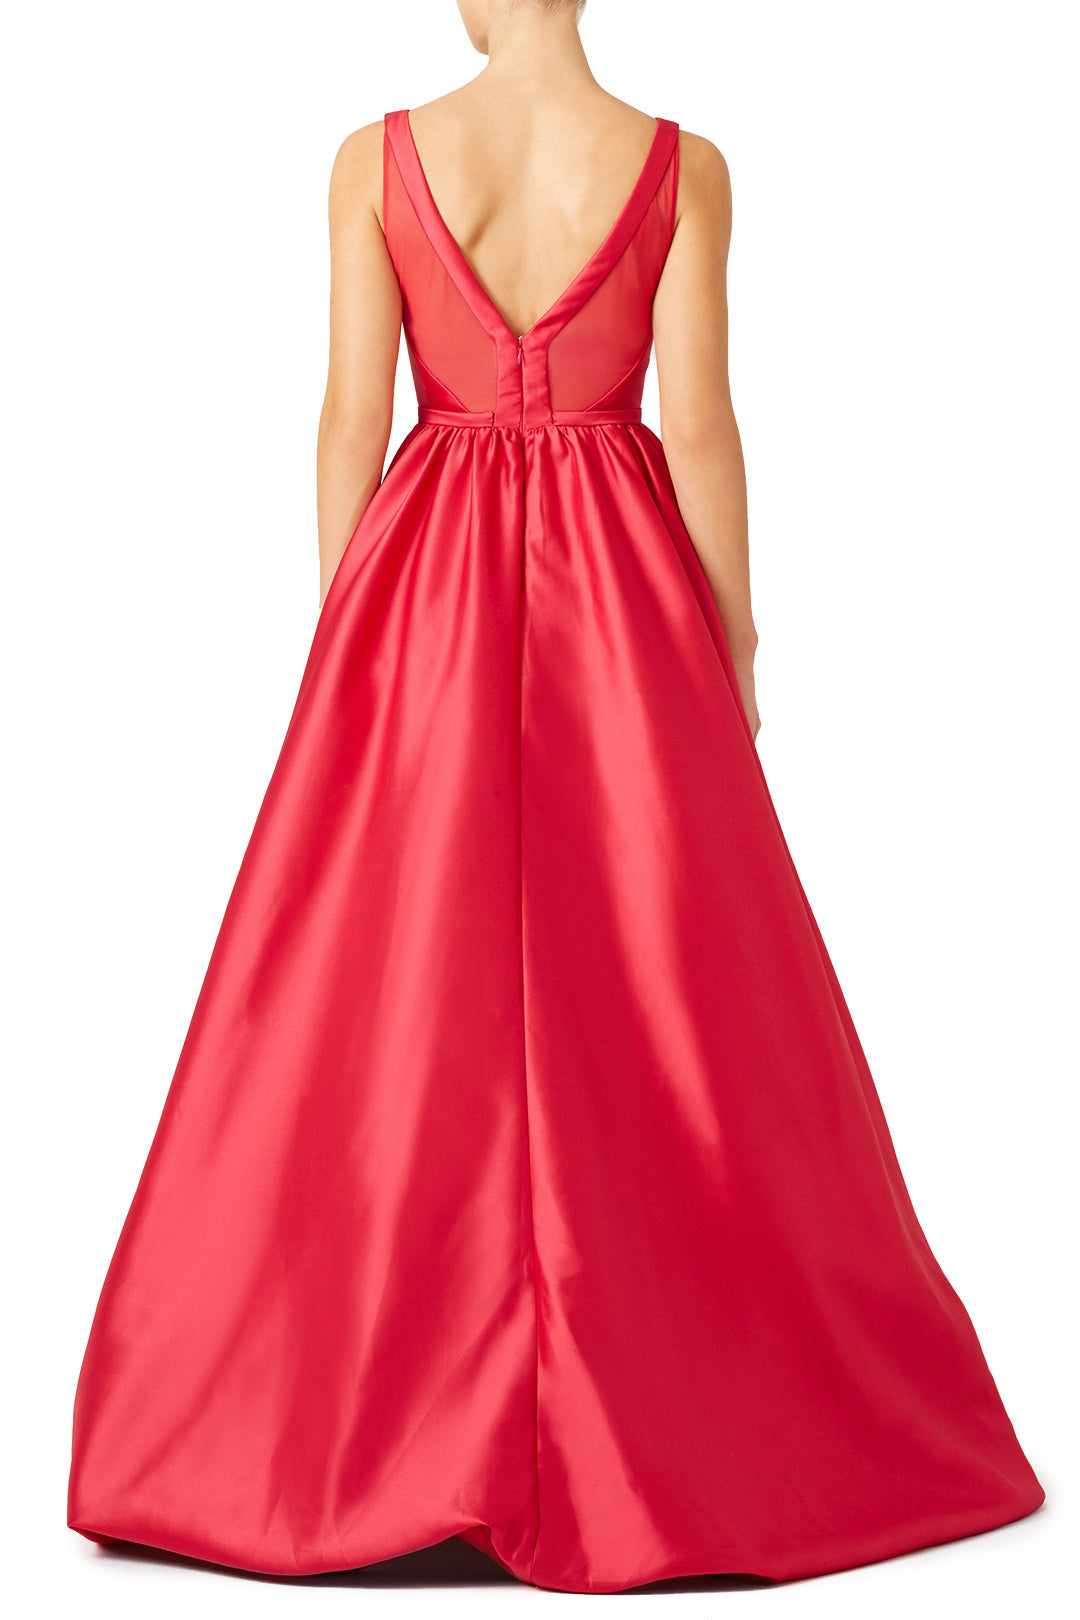 Satin Long Red Formal Dress Evening Gowns with Pockets